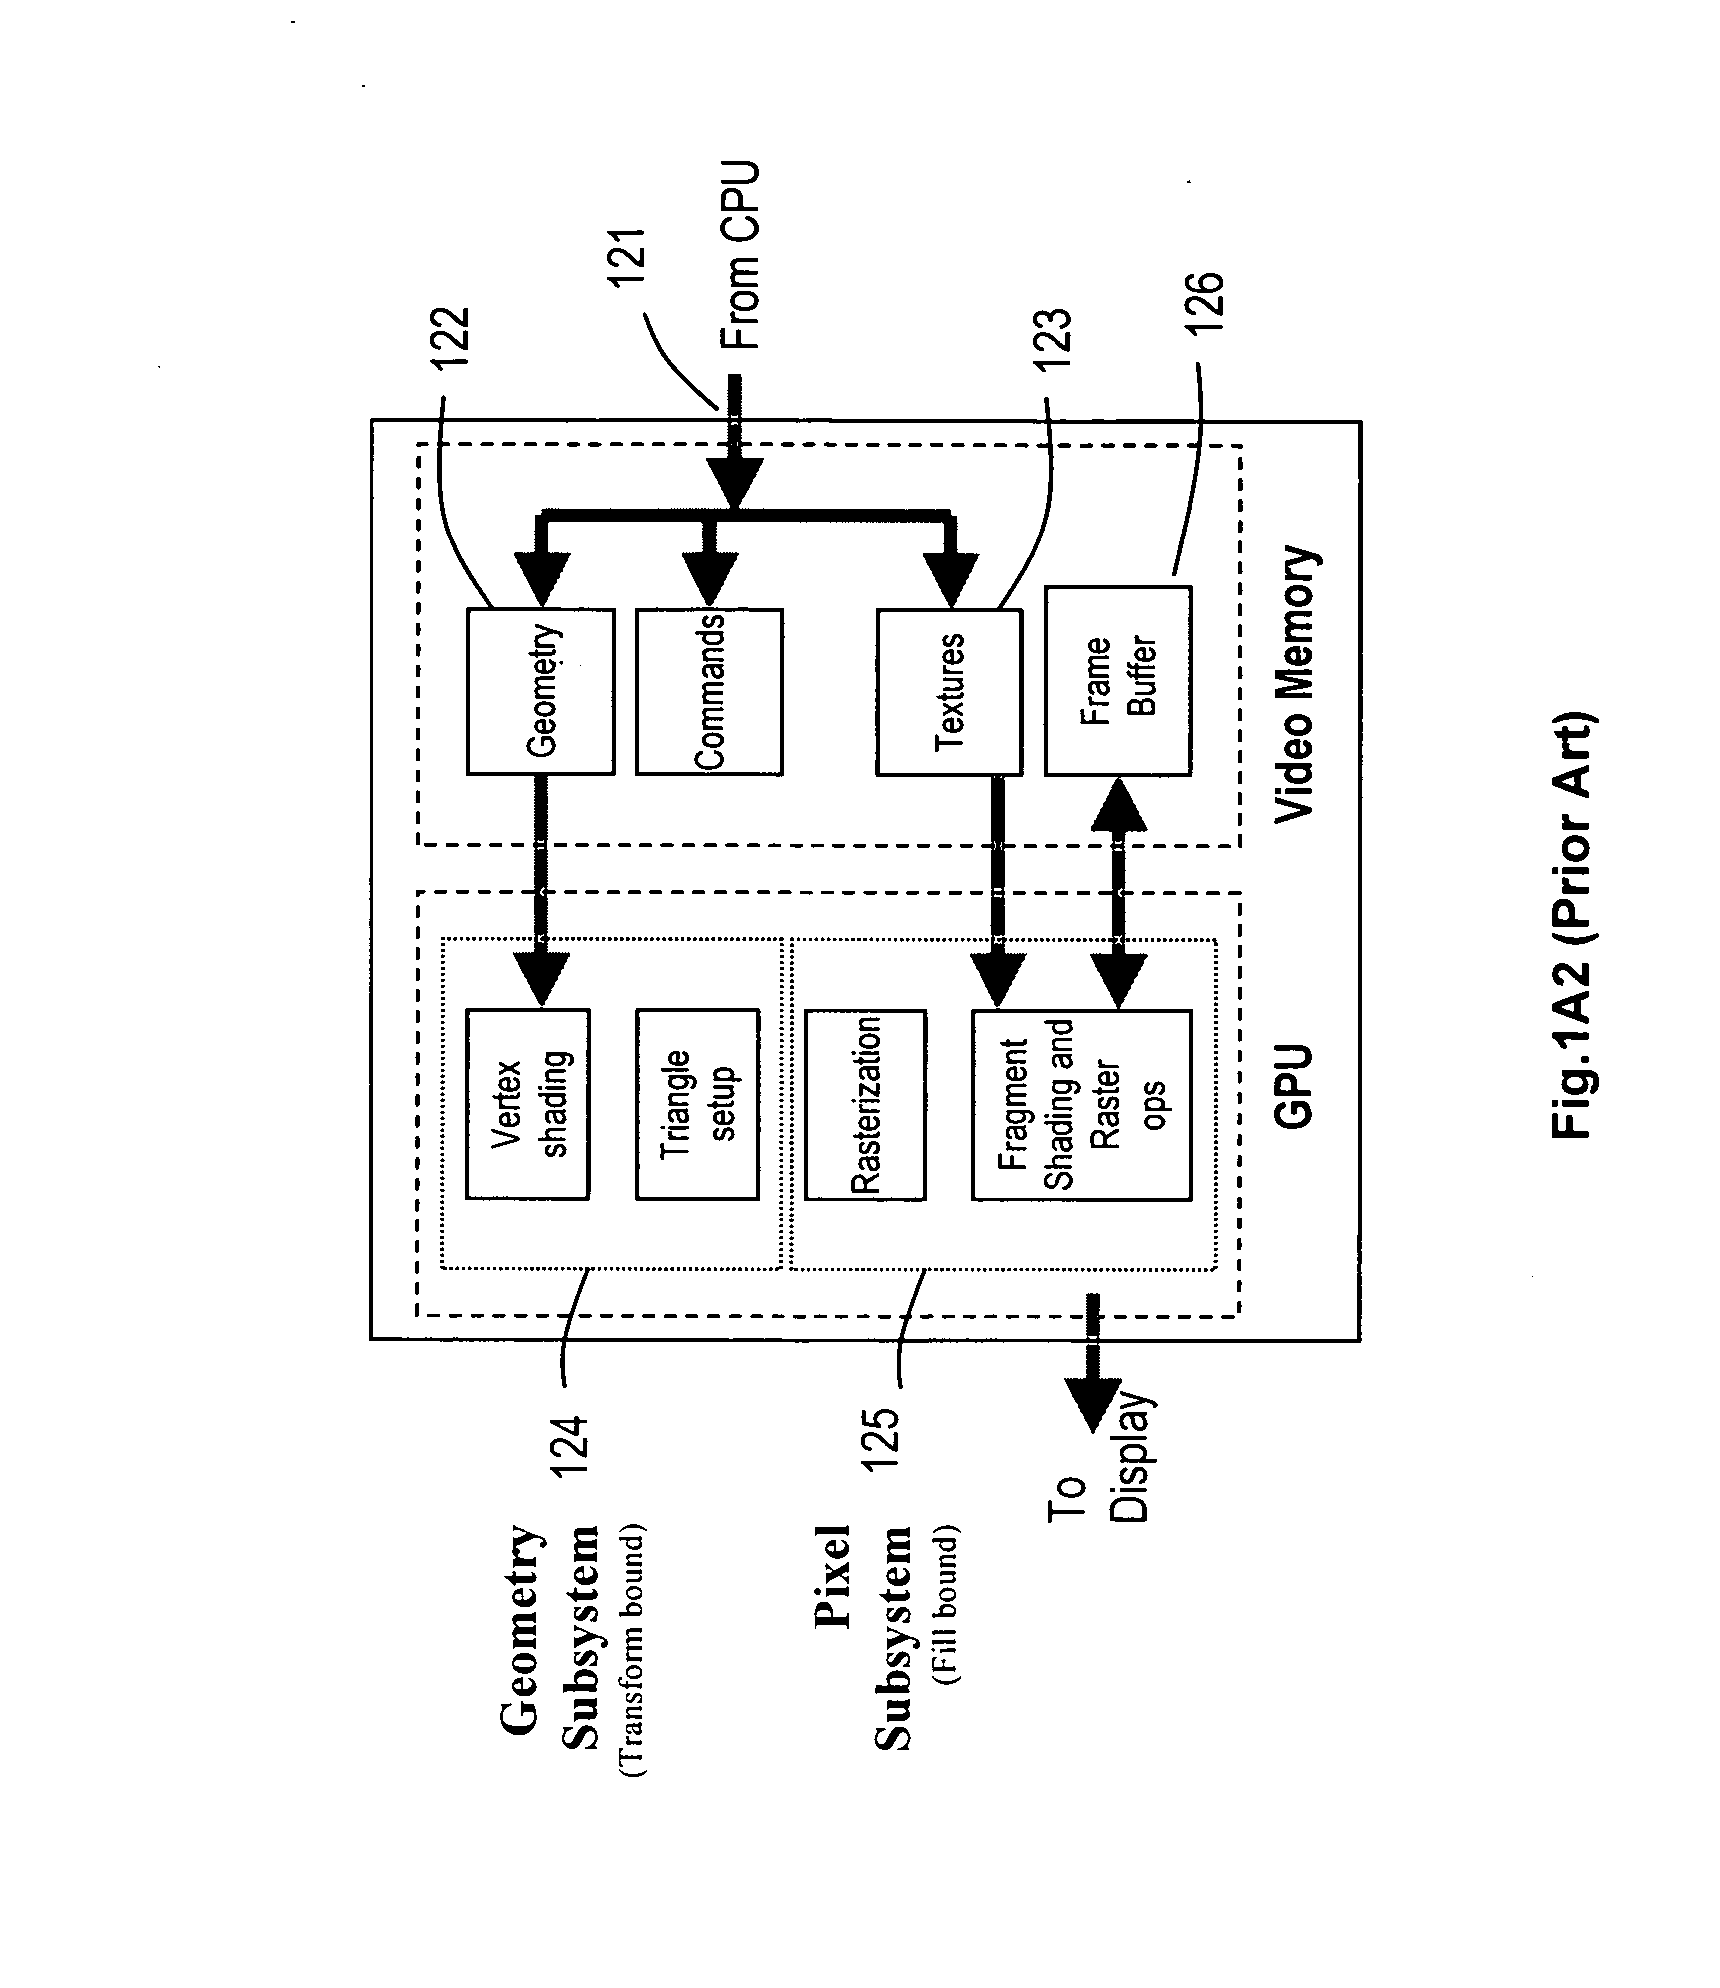 Method of rendering pixel-composited images for a graphics-based application running on a computing system embodying a multi-mode parallel graphics rendering system